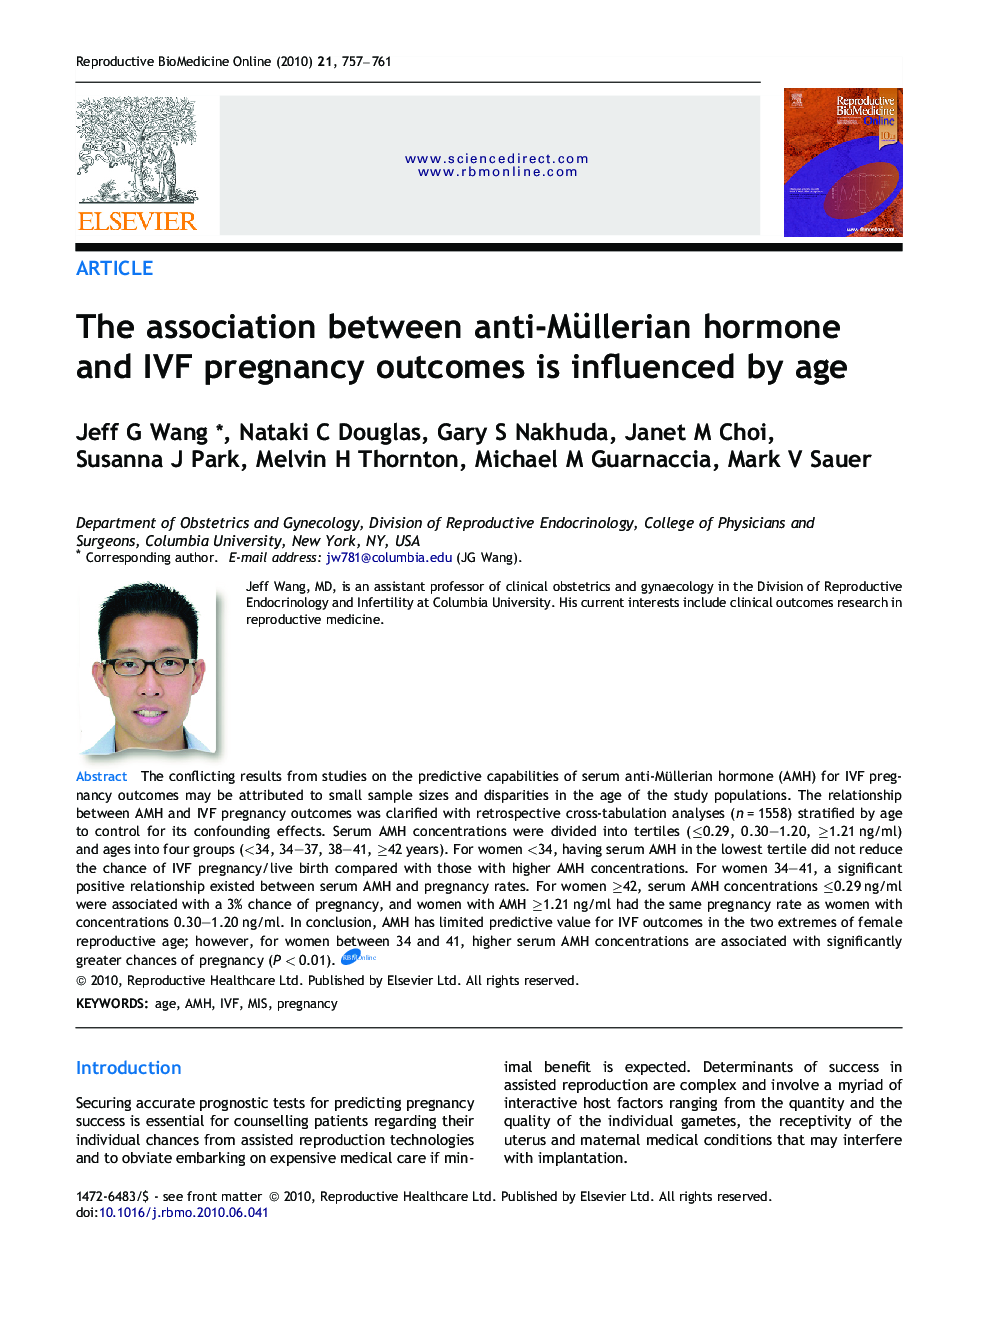 The association between anti-Müllerian hormone and IVF pregnancy outcomes is influenced by age 